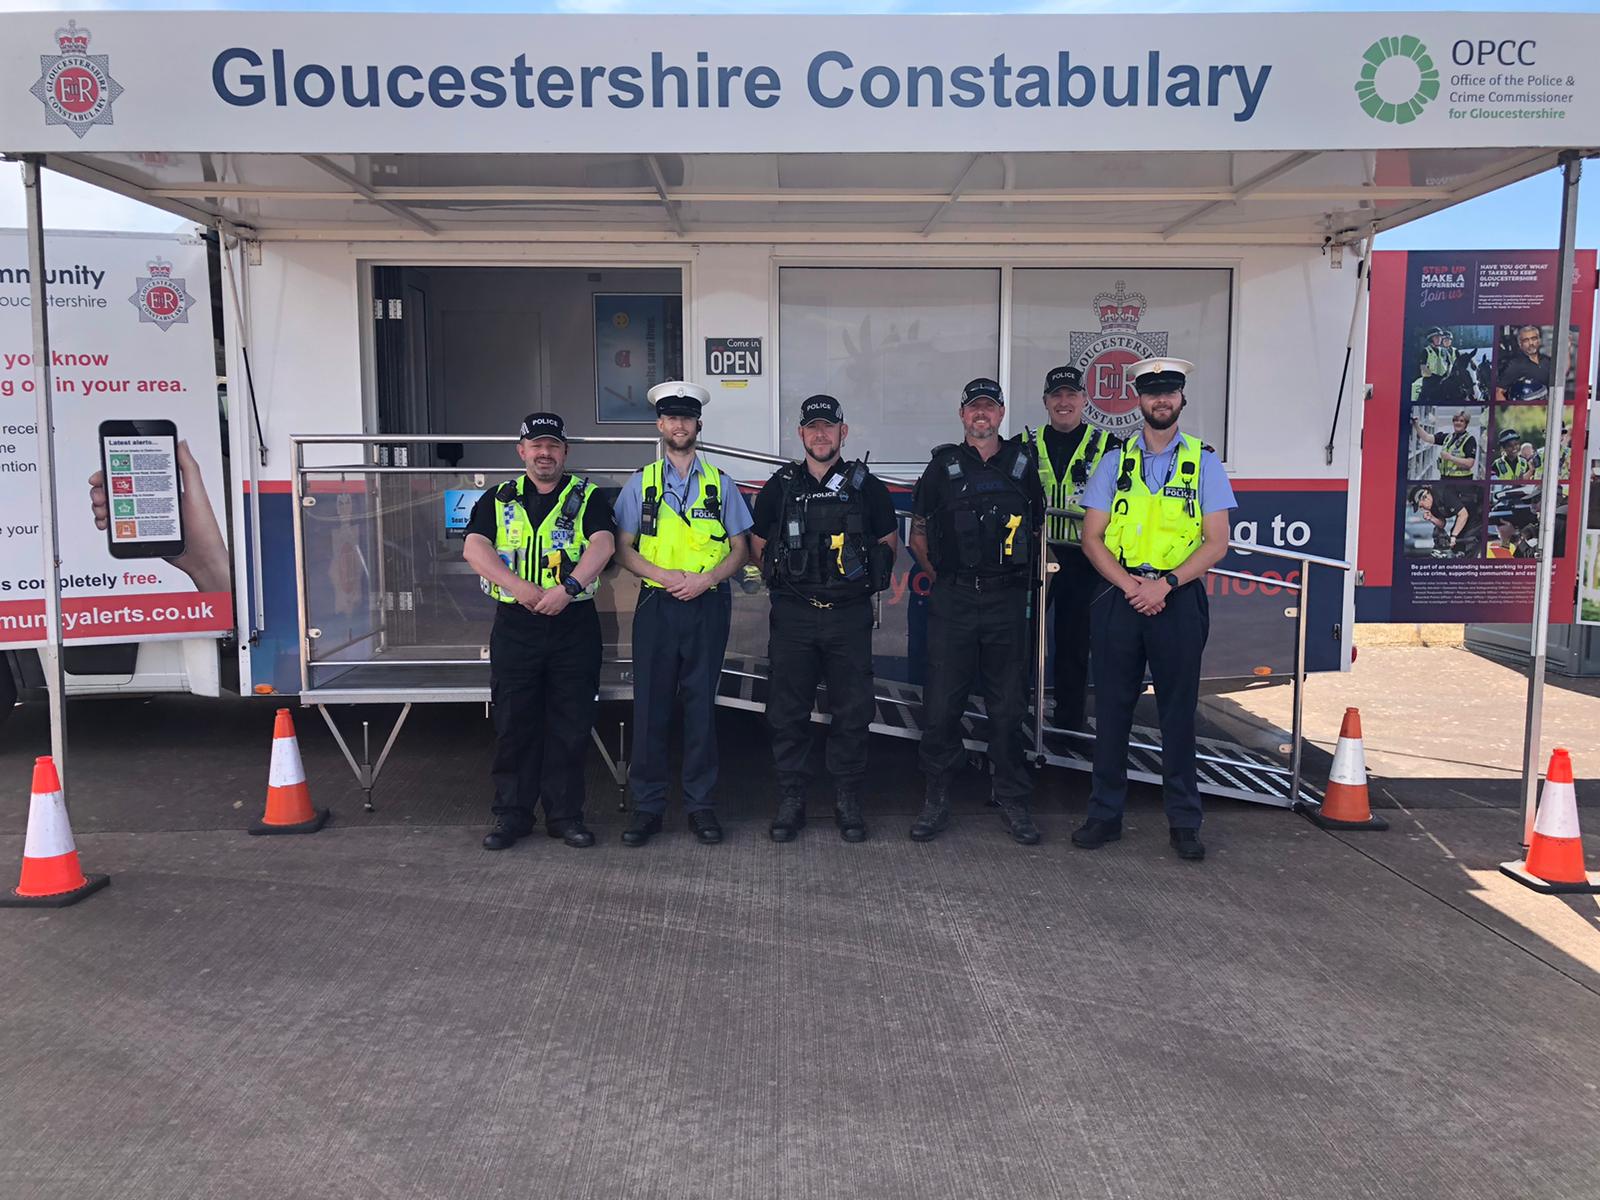 RAF Police with Gloucestershire Constabulary